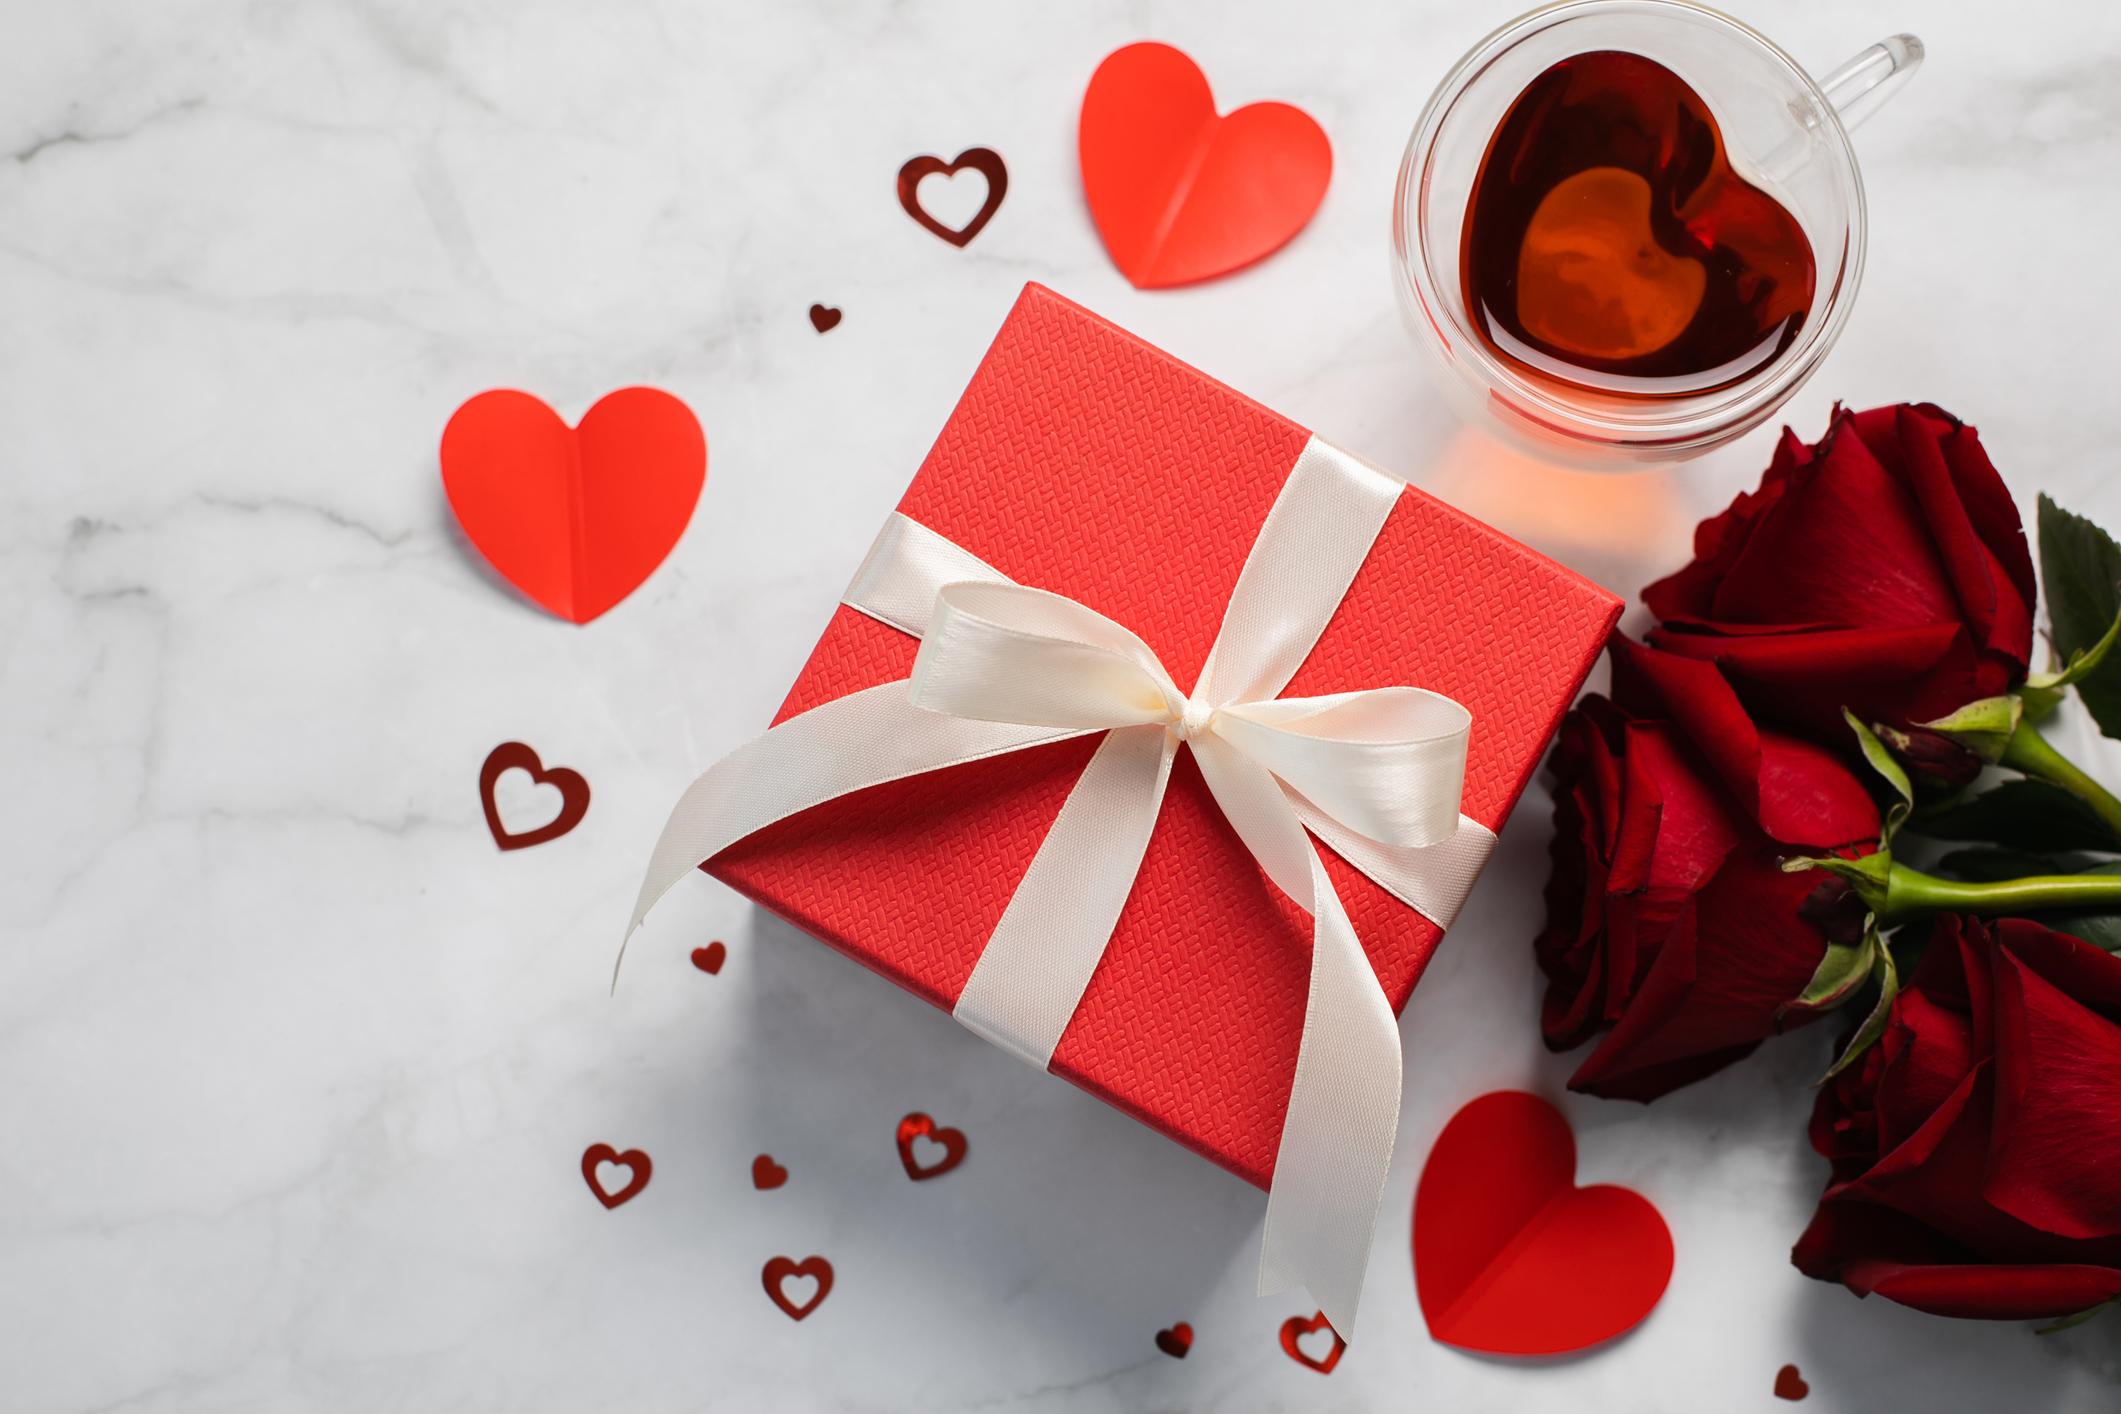  A white marble background with a red present for valentine's day along with red roses, and red heart confetti. 